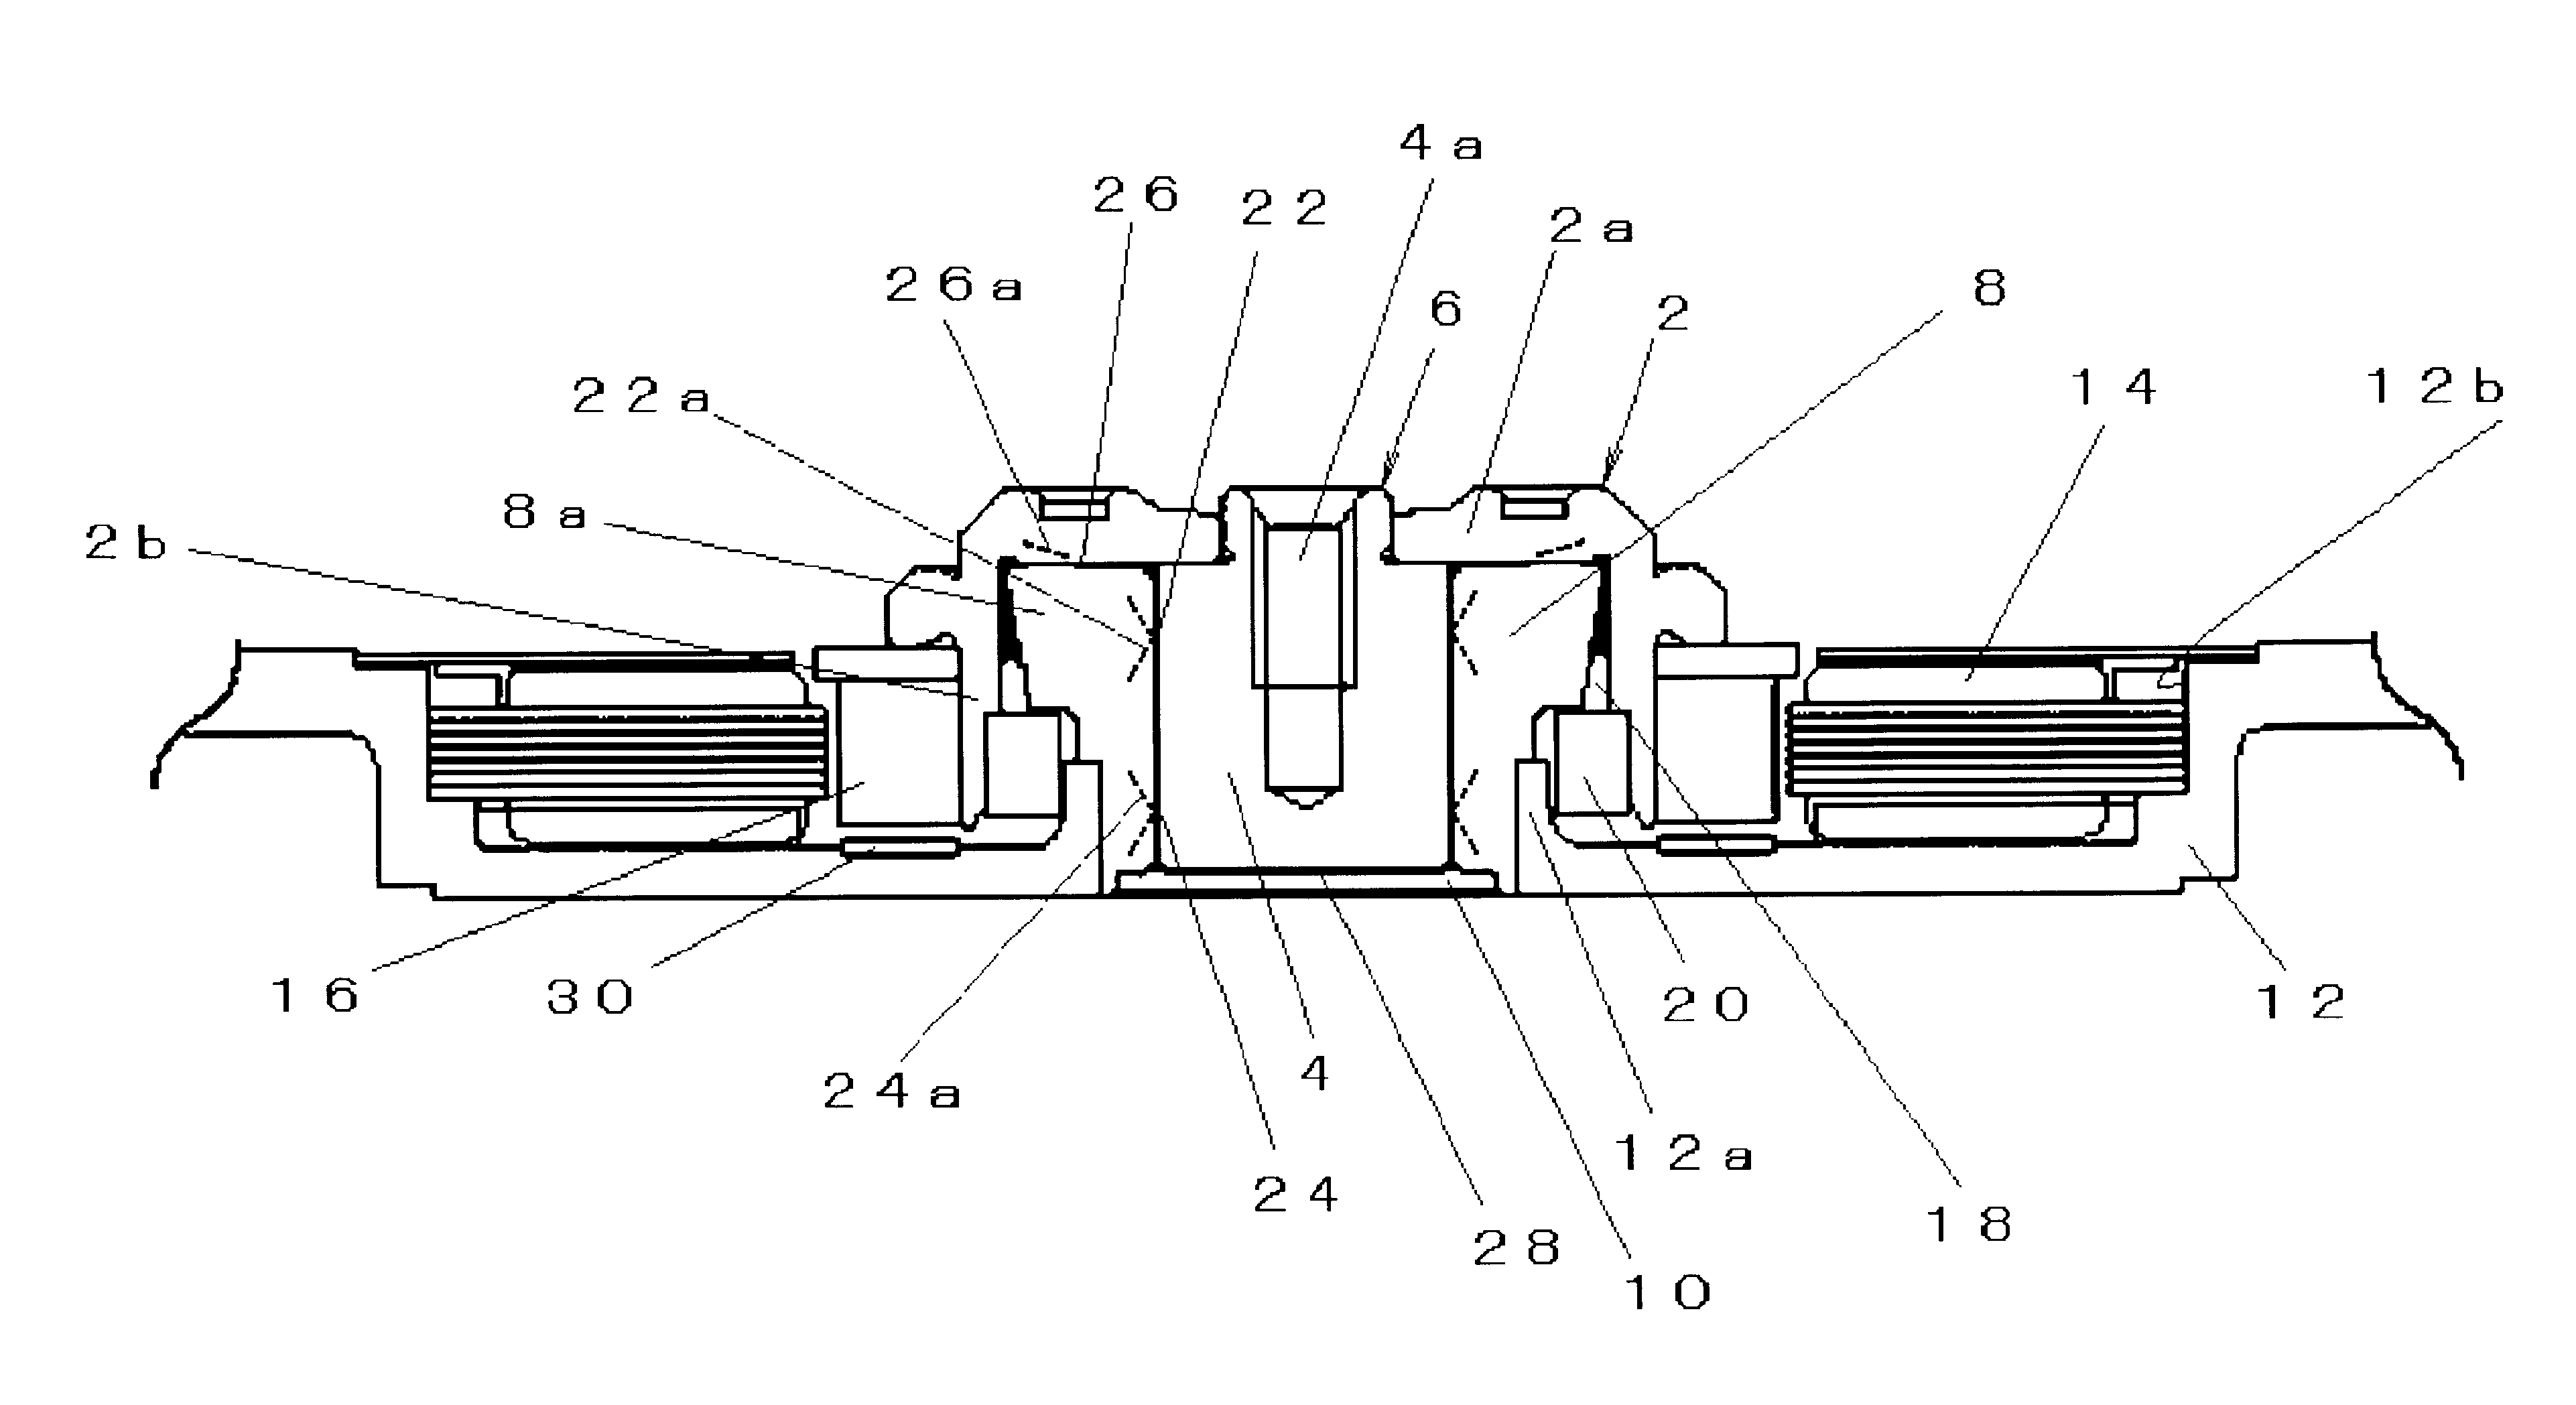 Spindle motor and disk drive utilizing the spindle motor